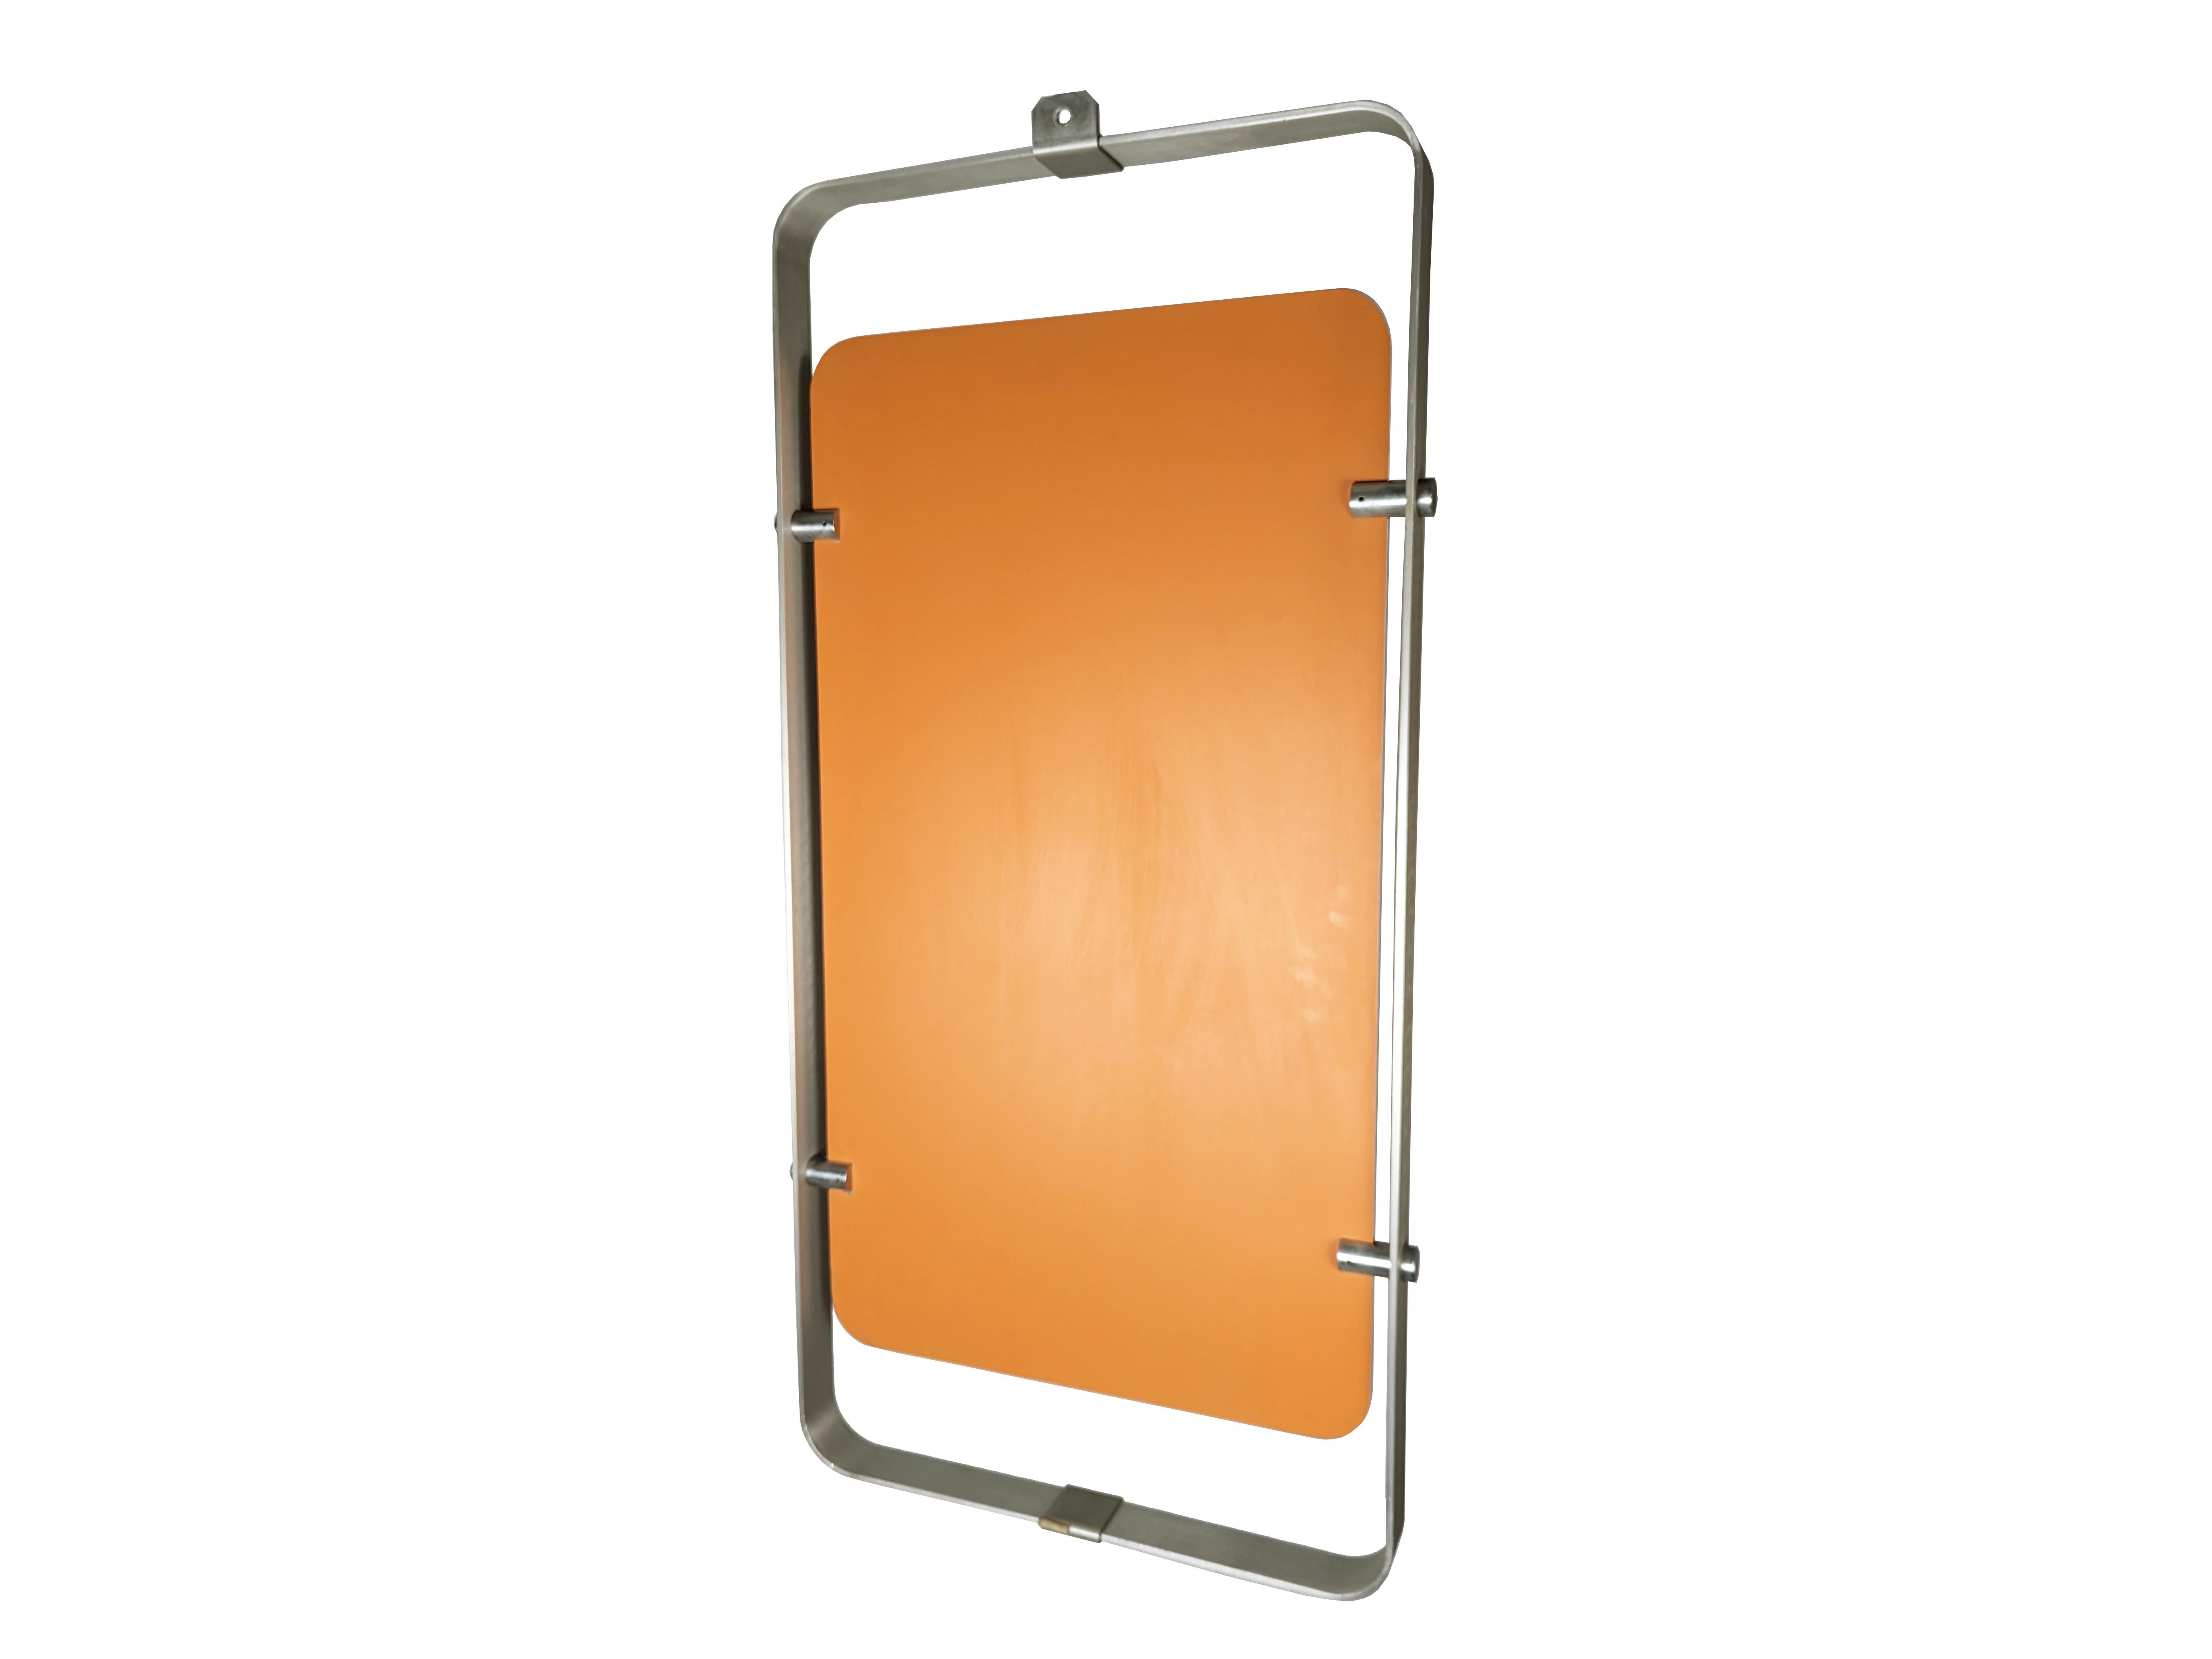 Beautiful full length mirror with thick aluminum frame and chrome metal joints. Its design is reminiscent of similar contemporary products made by Fontana Arte.

Only the internal mirror measures 85h x 47cm